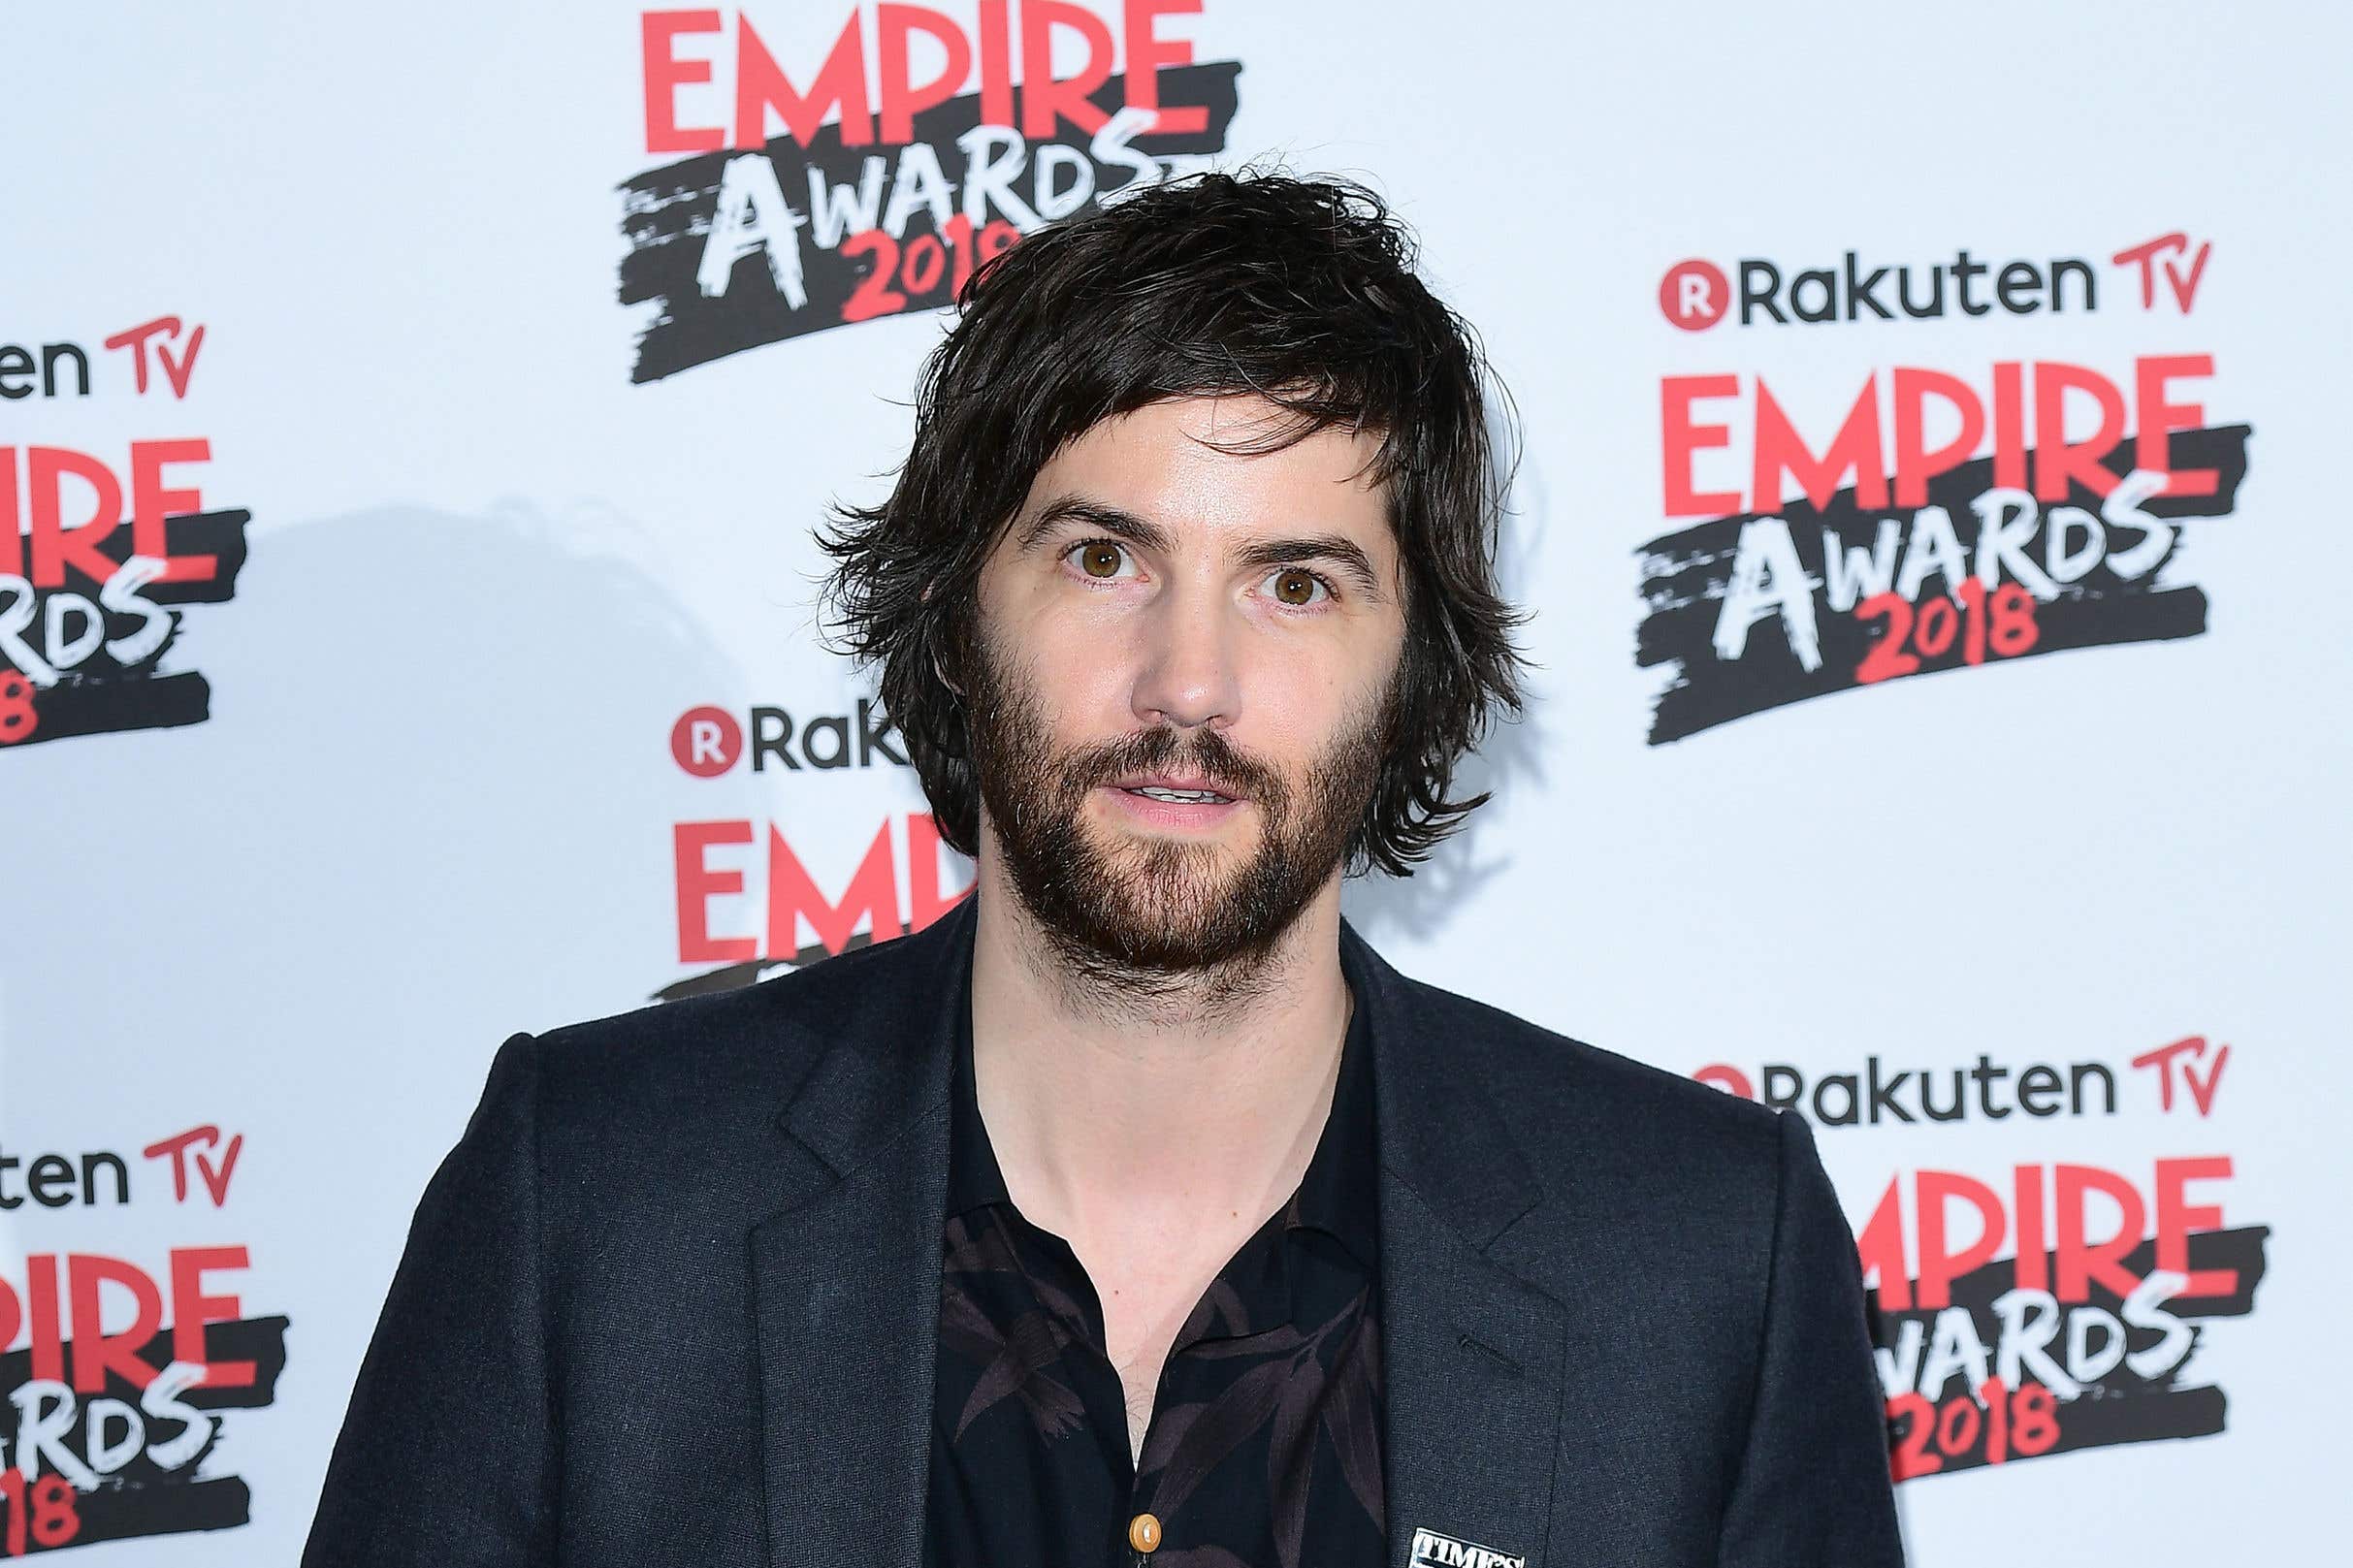 Jim Sturgess speaks about One Day being remade and his debut album (Ian West/PA)